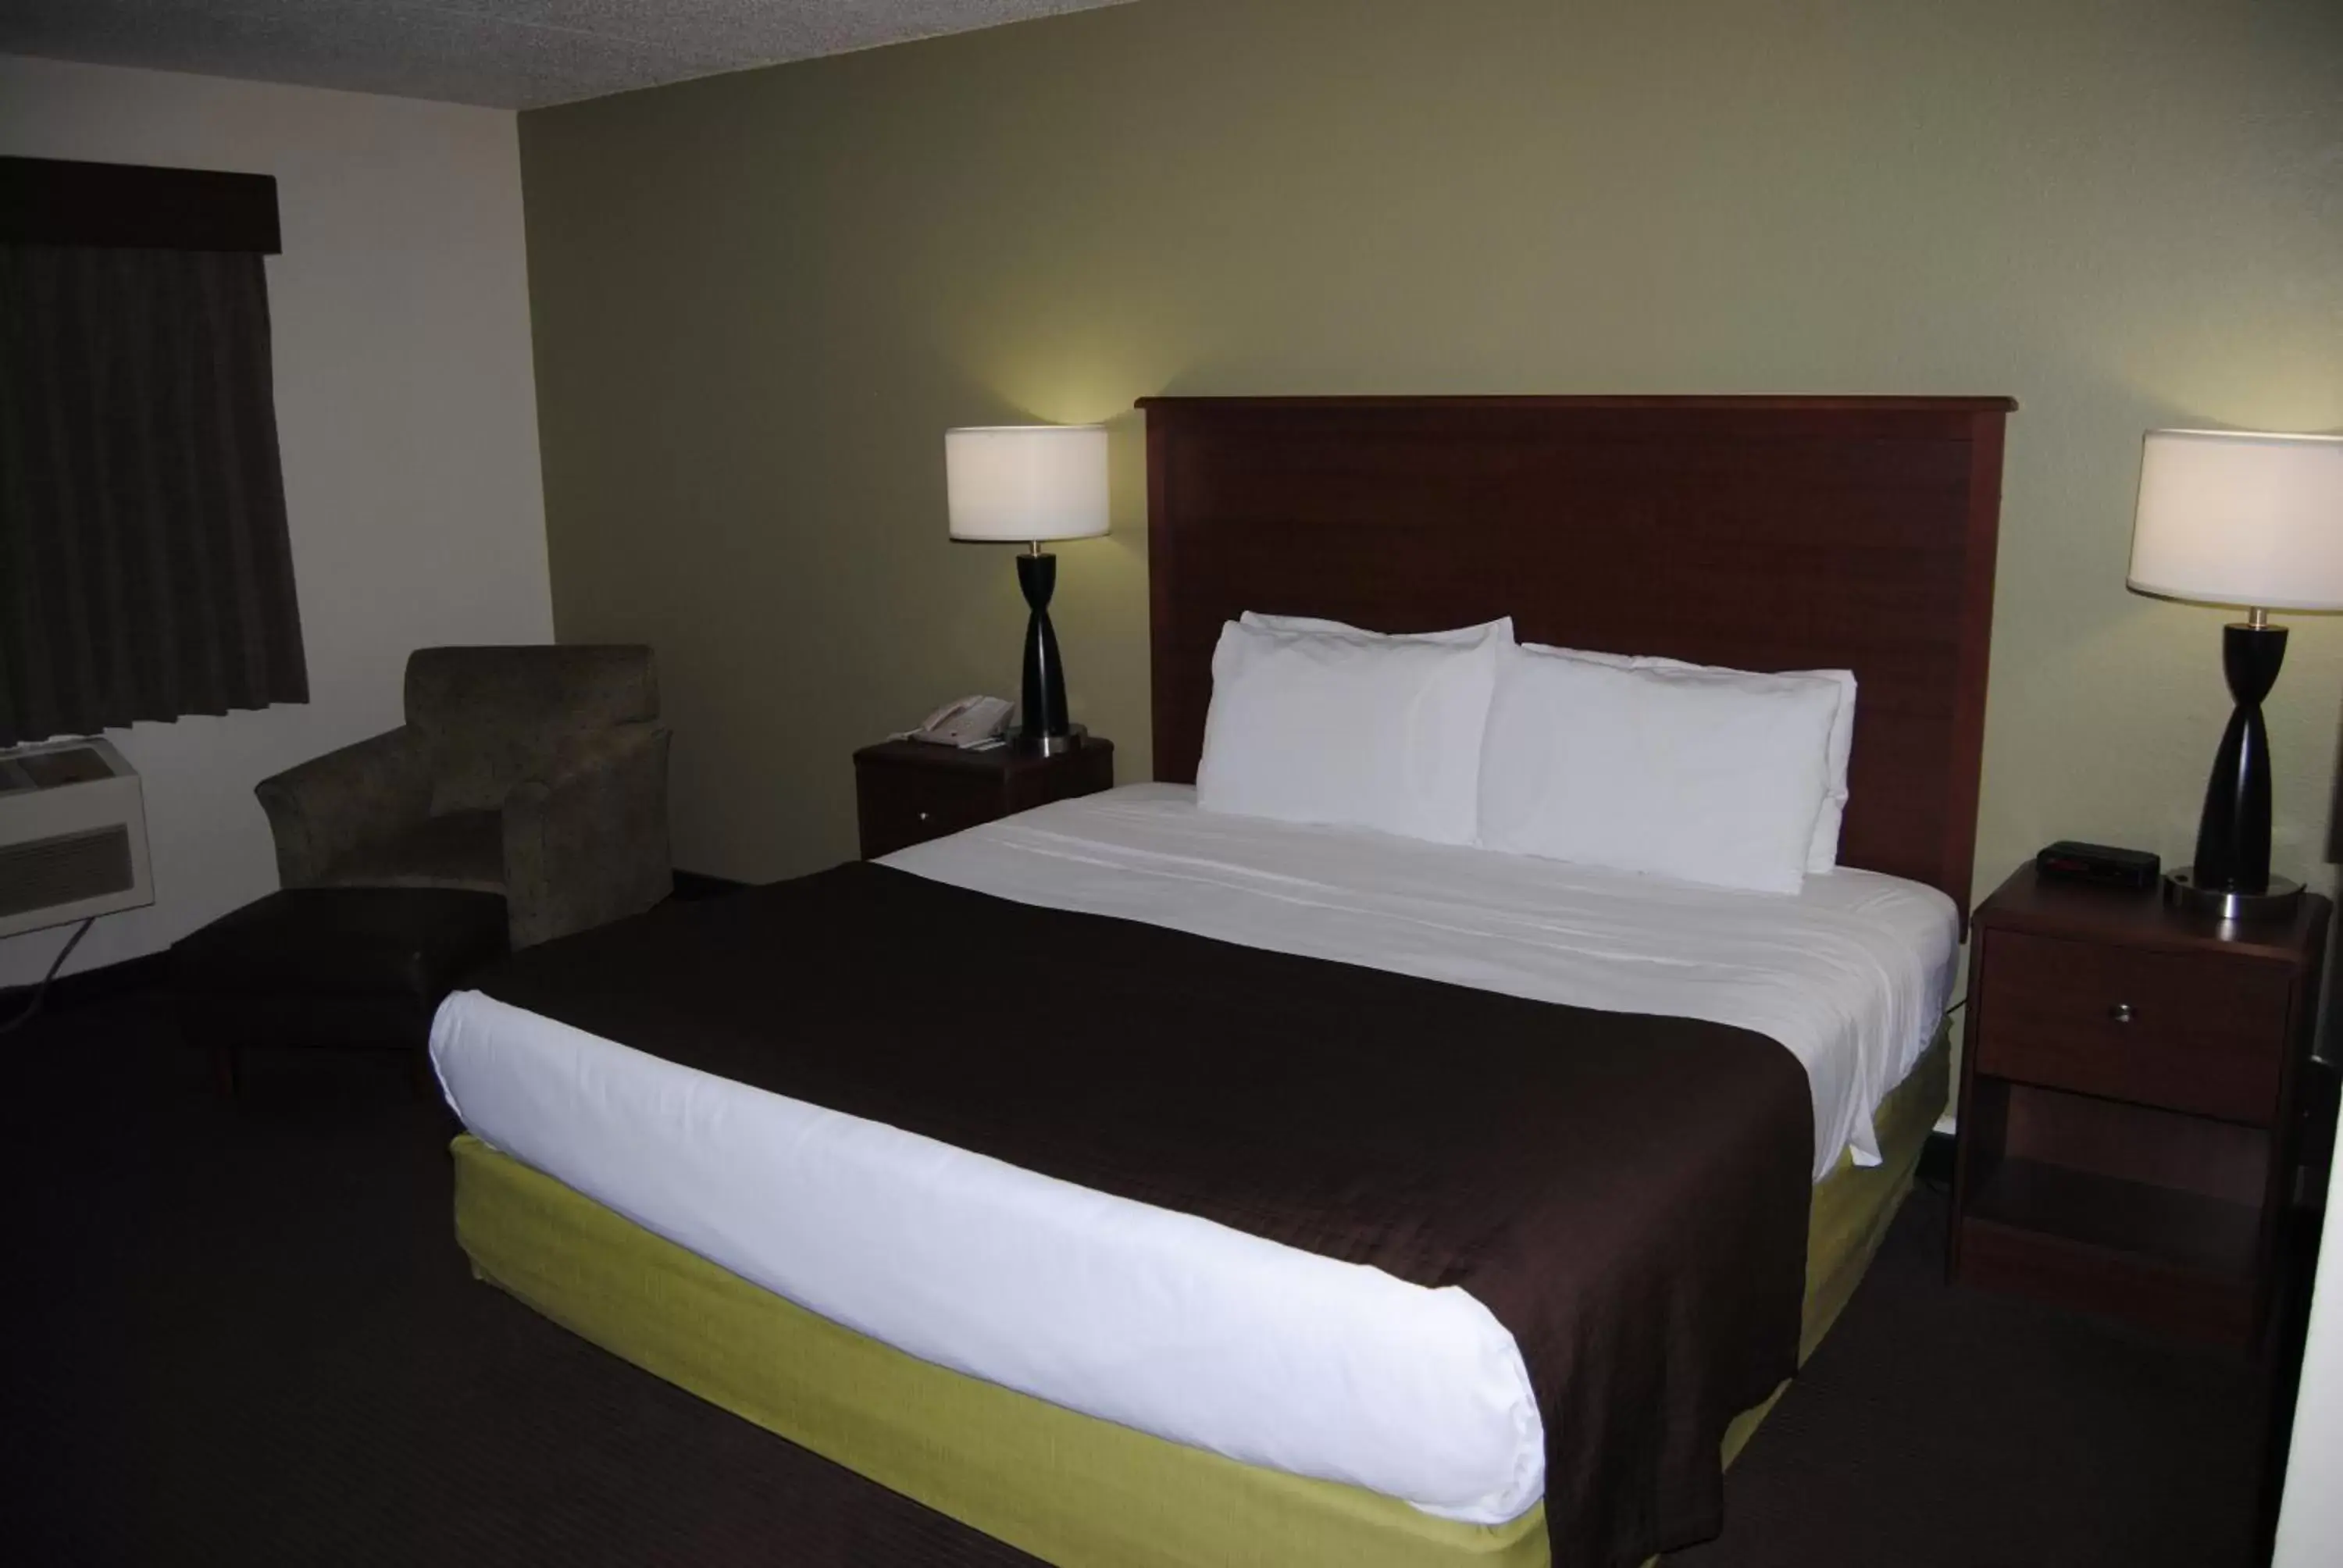 Bed, Room Photo in AmericInn by Wyndham Grand Rapids